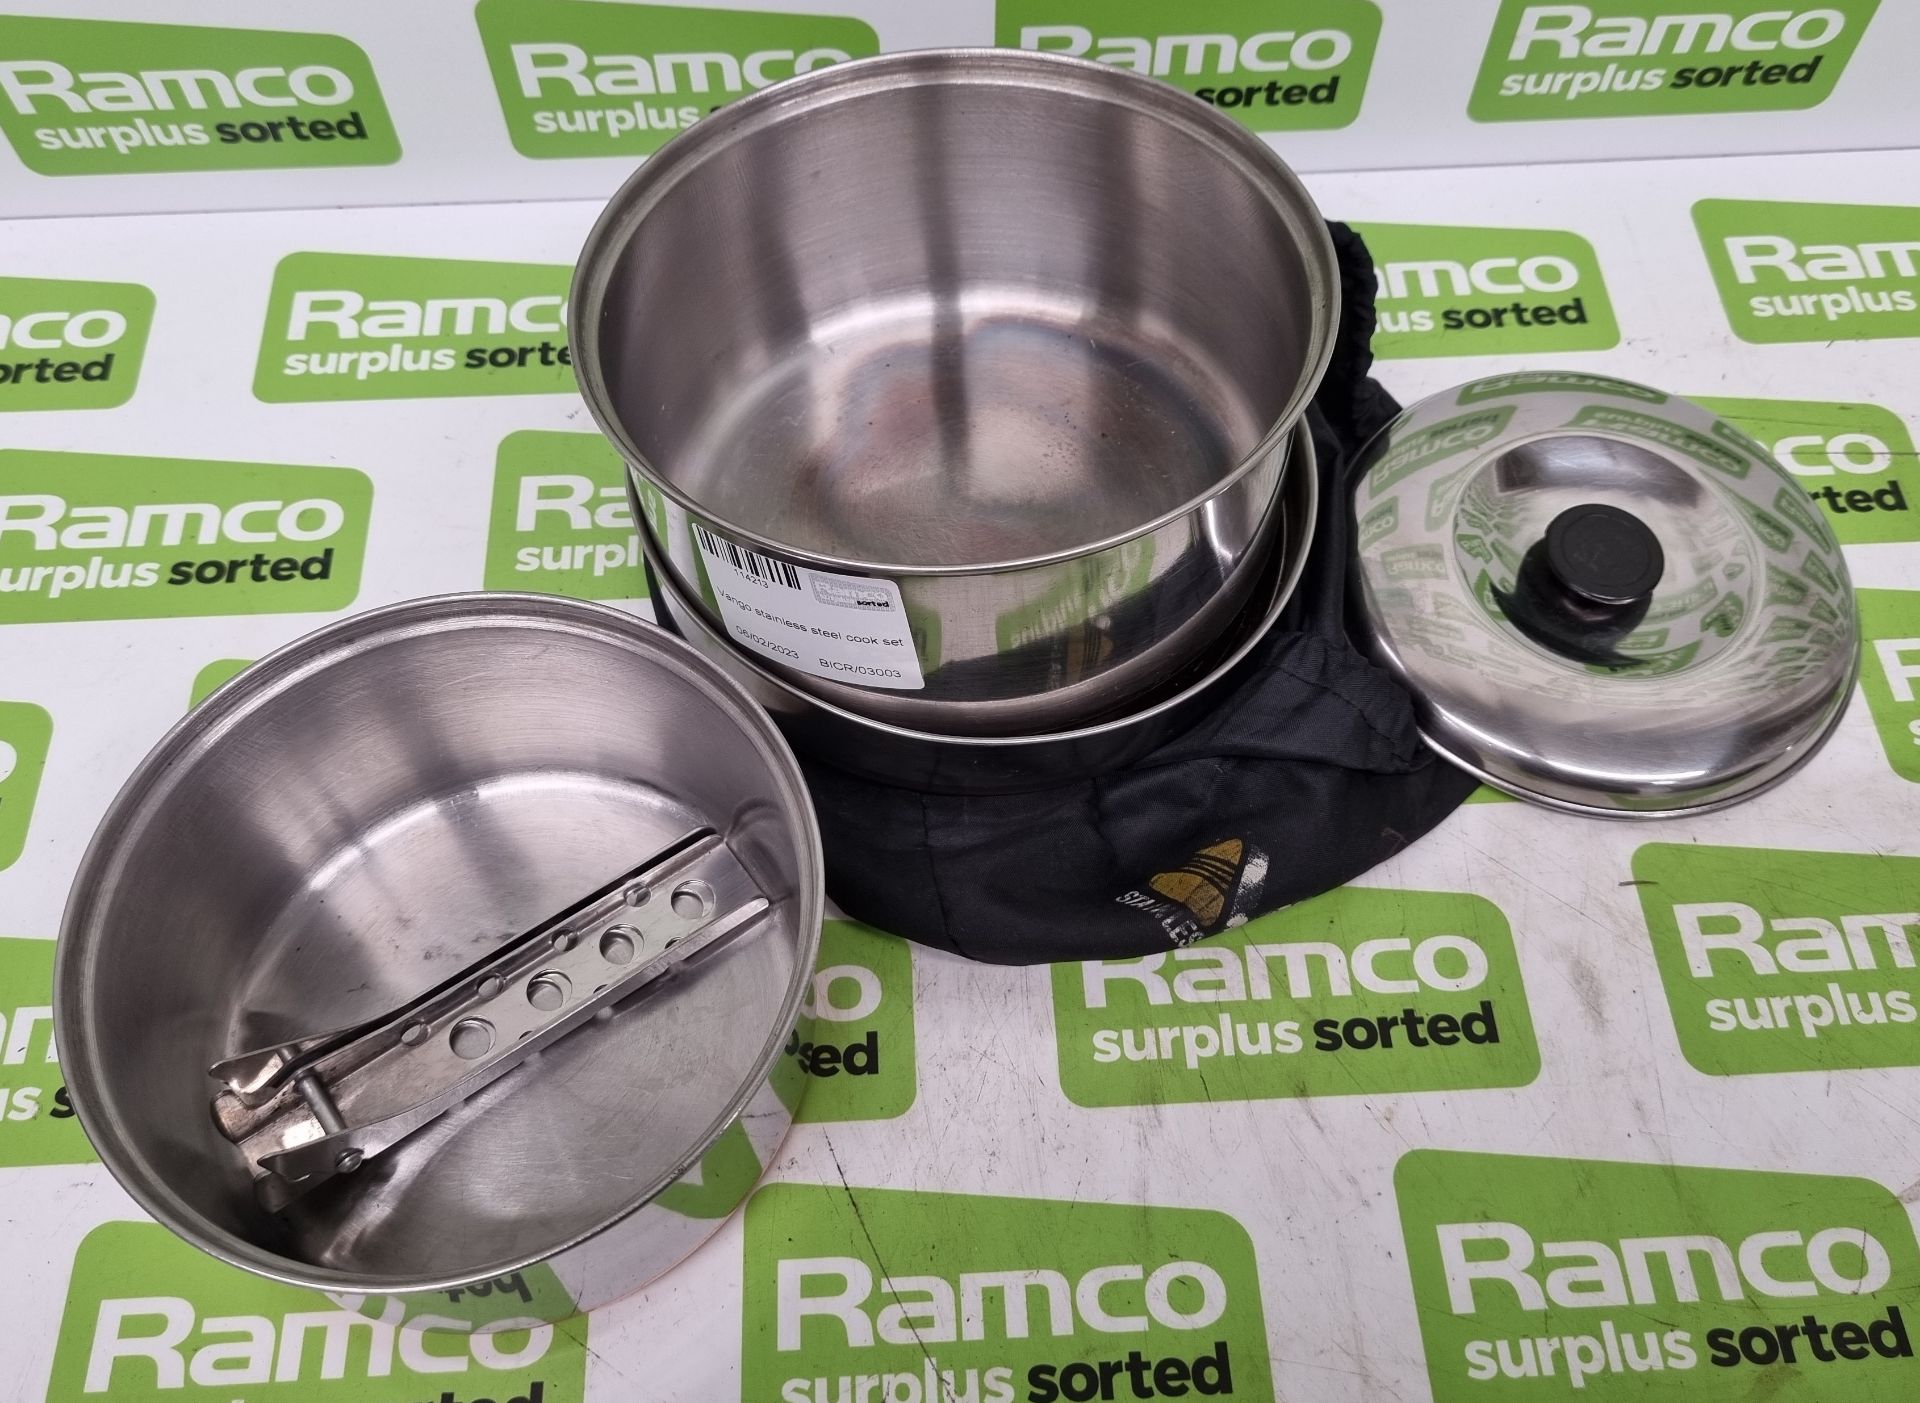 2x Vango stainless steel cook sets - Image 2 of 4